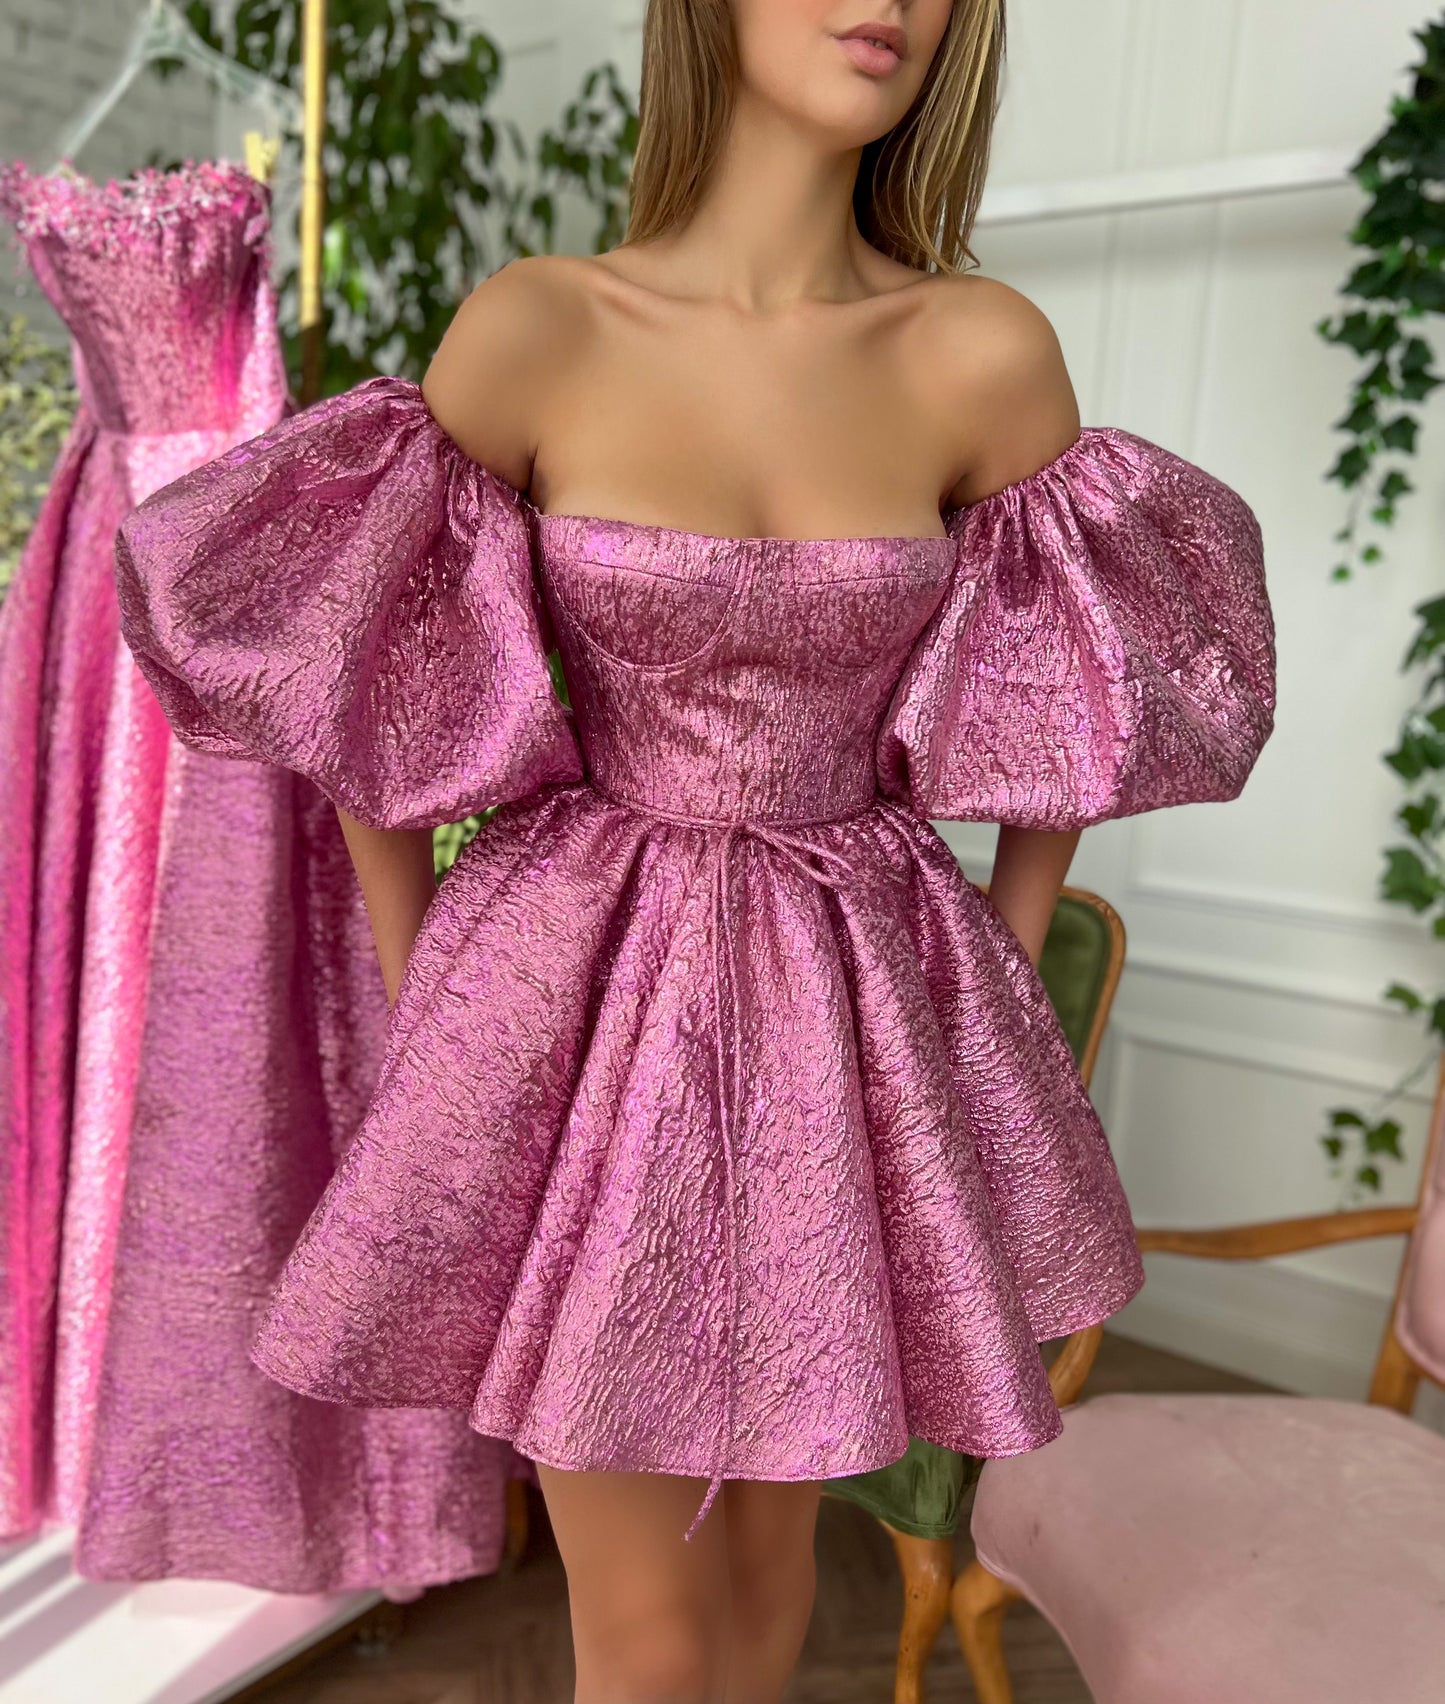 Pink mini dress with off the shoulder sleeves and taffeta brocade fabric